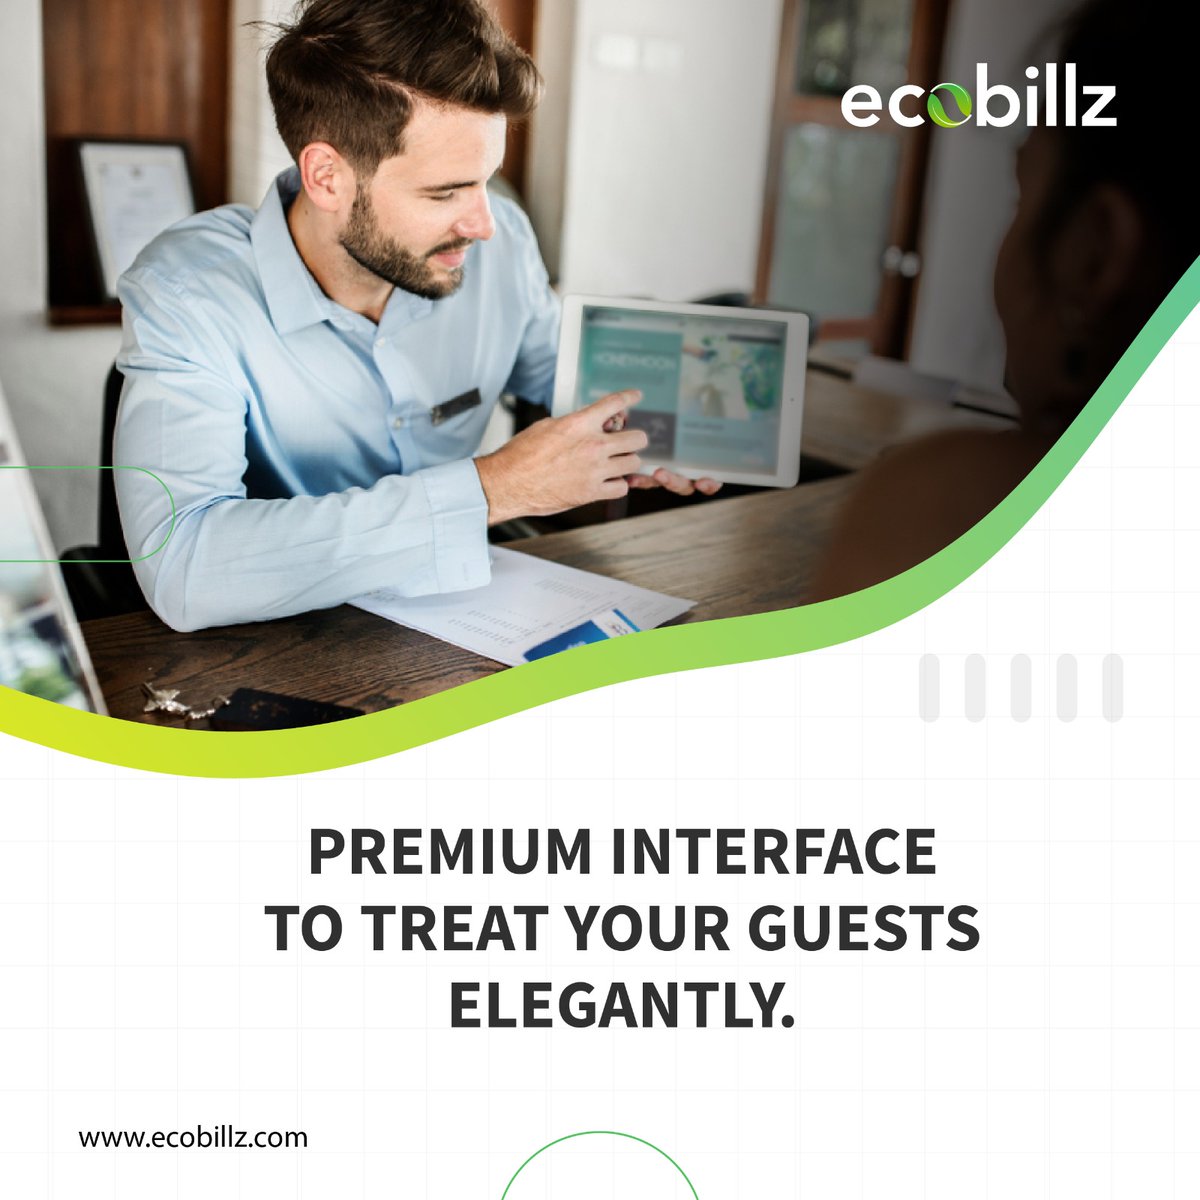 Premium Interface to treat your guests Elegantly!! @Ecobillz Private Limited #automation #automationsolutions #premiumexperience #experience #guestexperience #hospitality #hospitalityindustry #hospitalitytech #hospitalitytechnology #technologysolutions